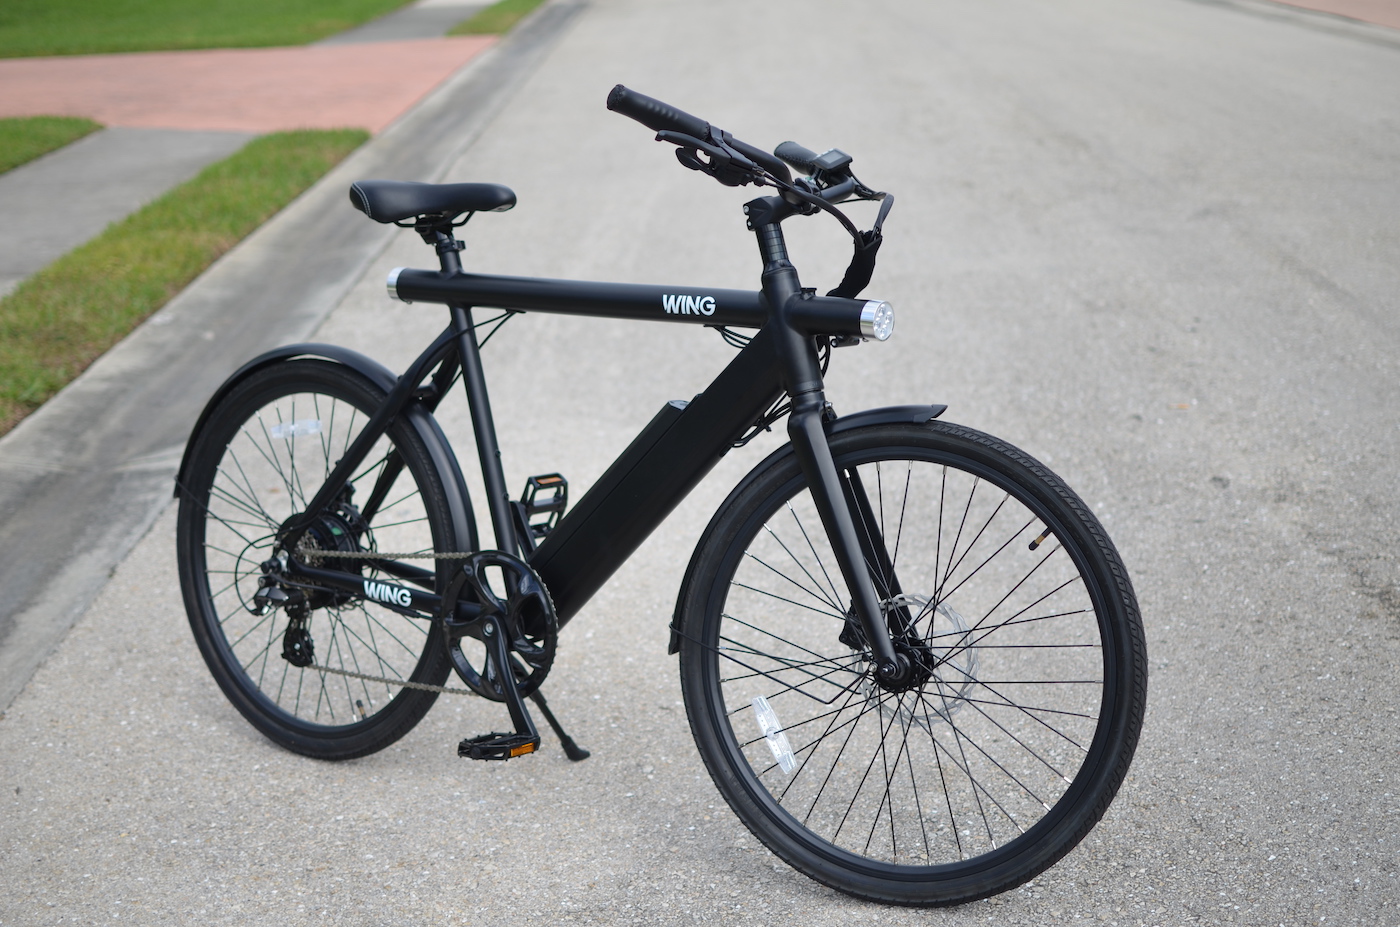 Wing Freedom electric bike review - a stylish and high performing e-bike